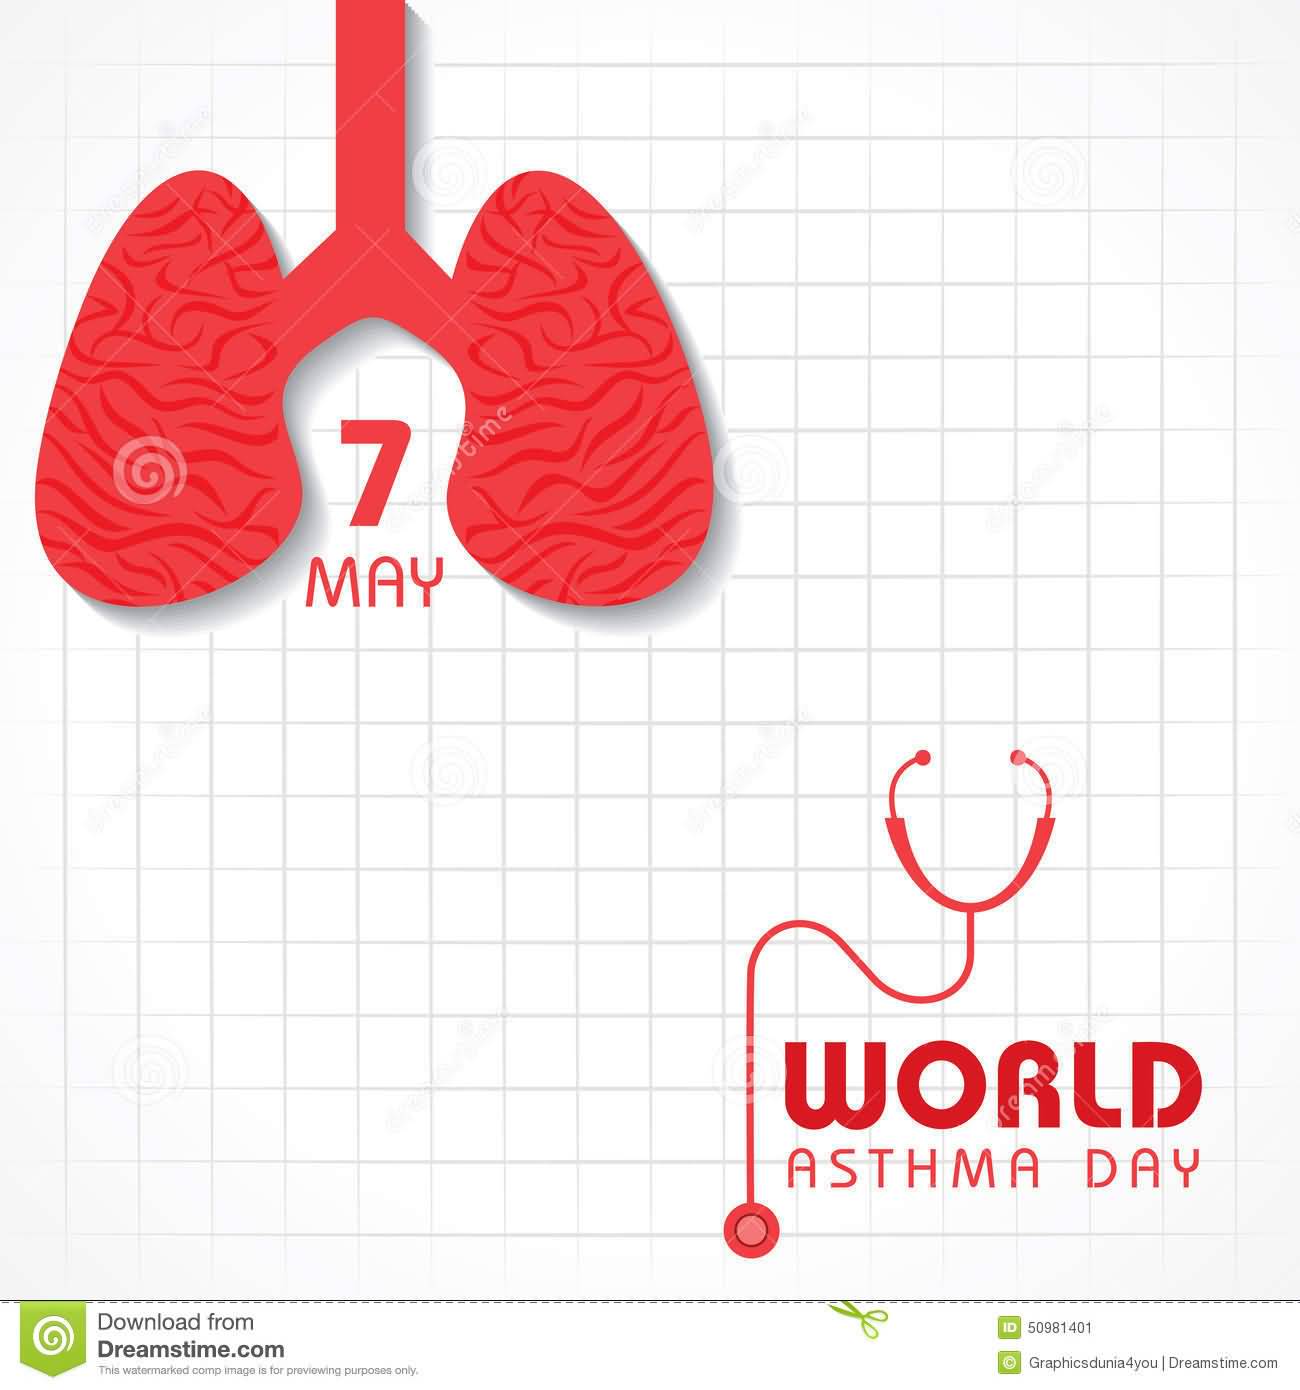 7 May World Asthma Day Lungs Illustrationj